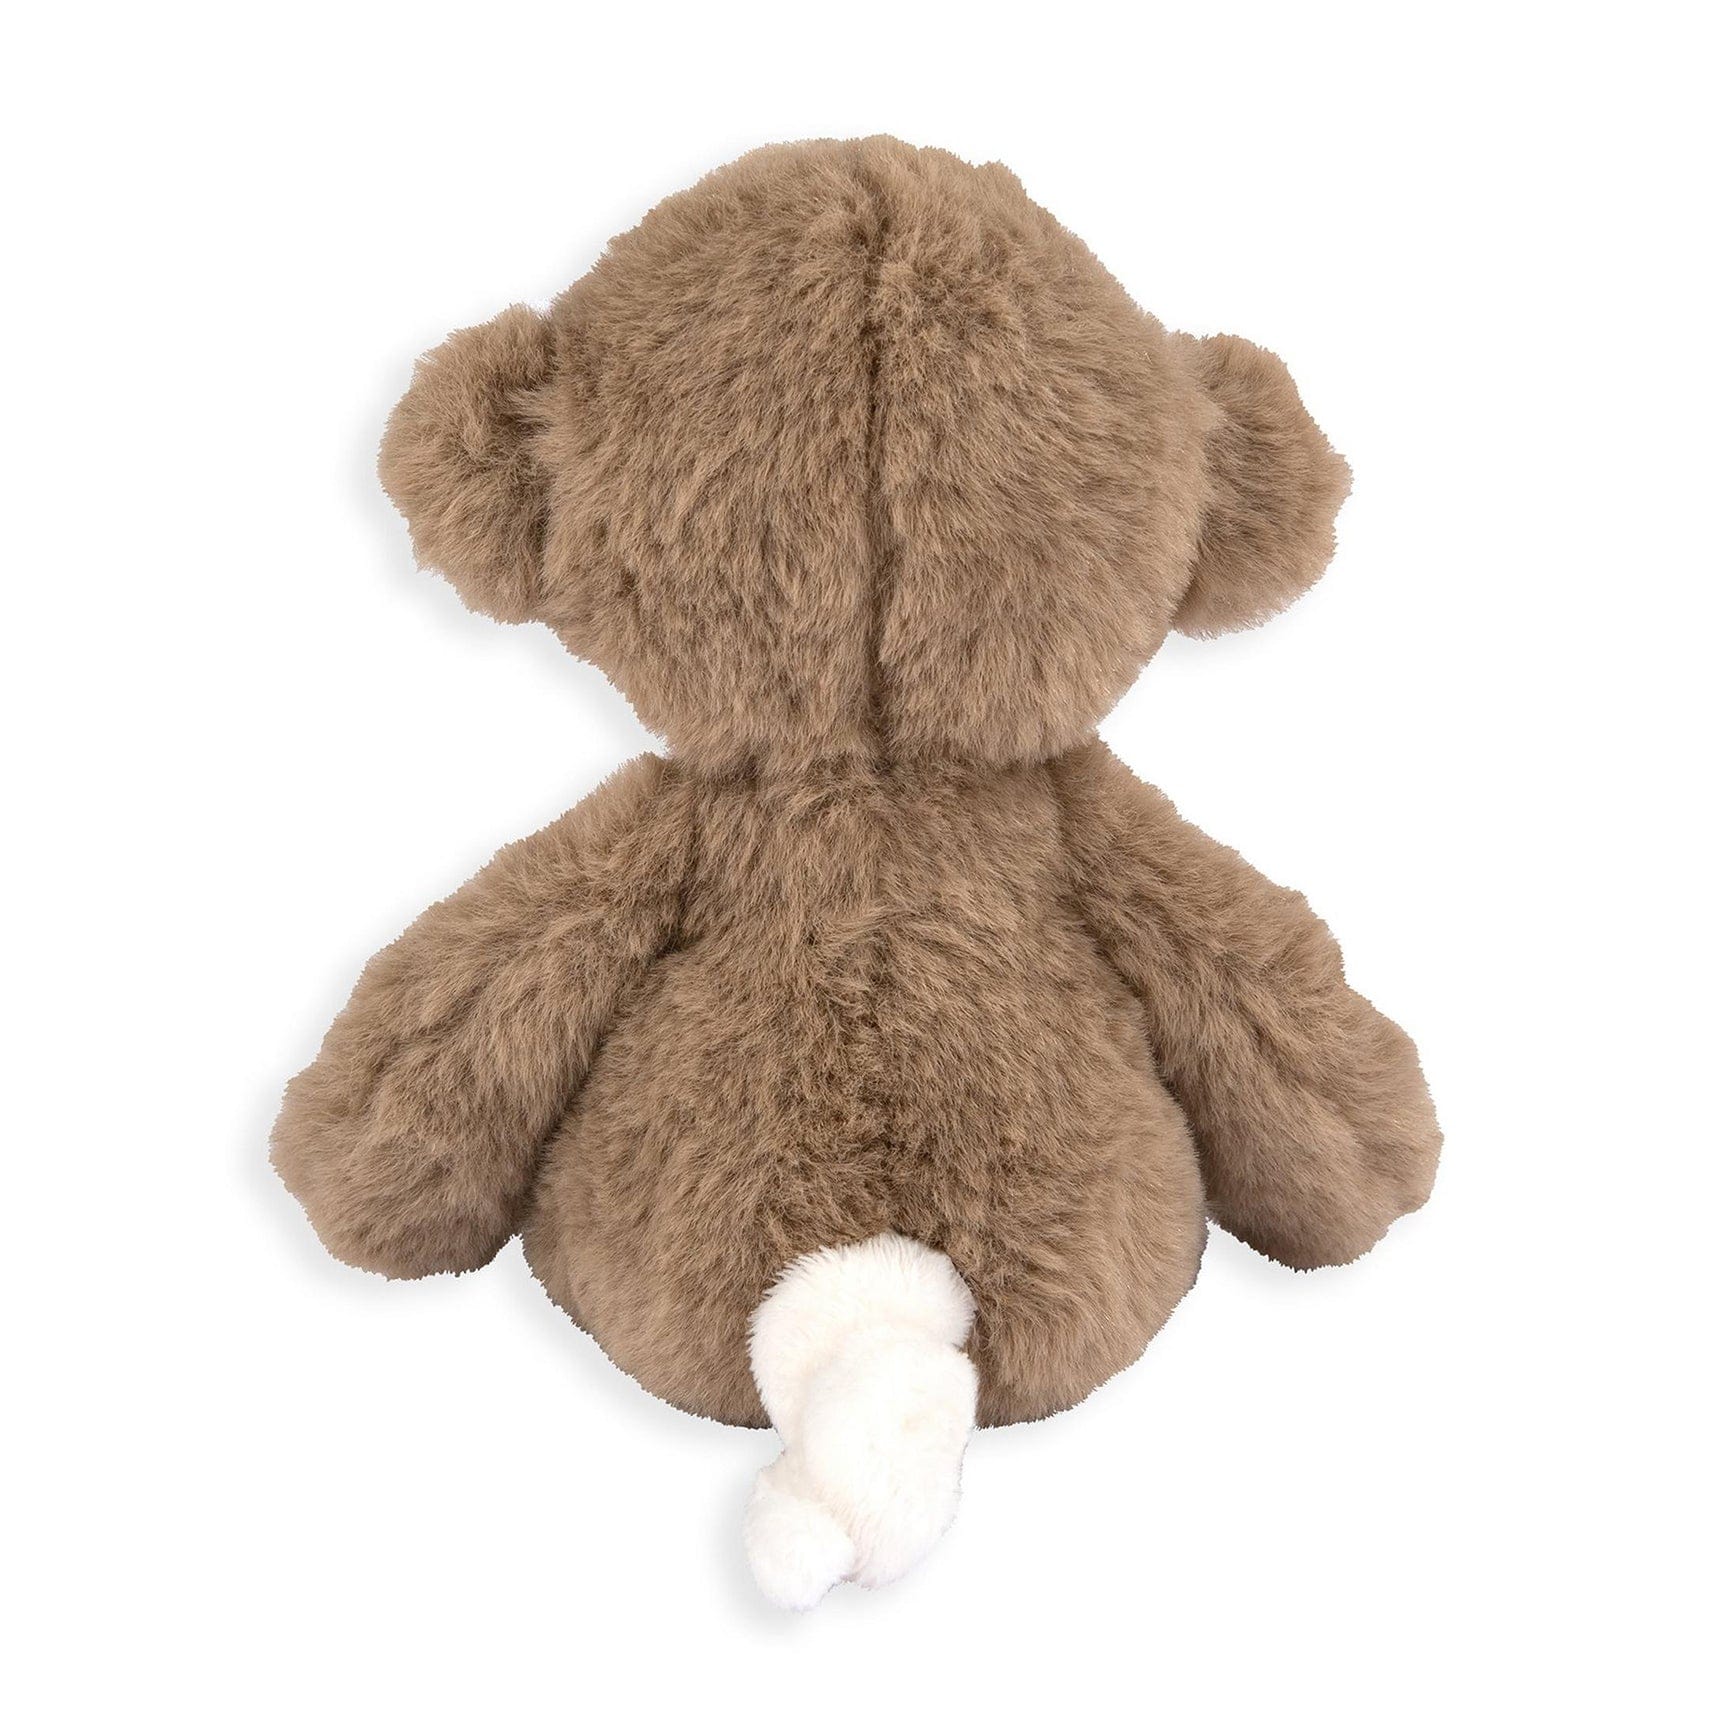 Mamas & Papas Soft Toy Welcome to the World in Monkey Soft Animals 4855MR301 5057232699651